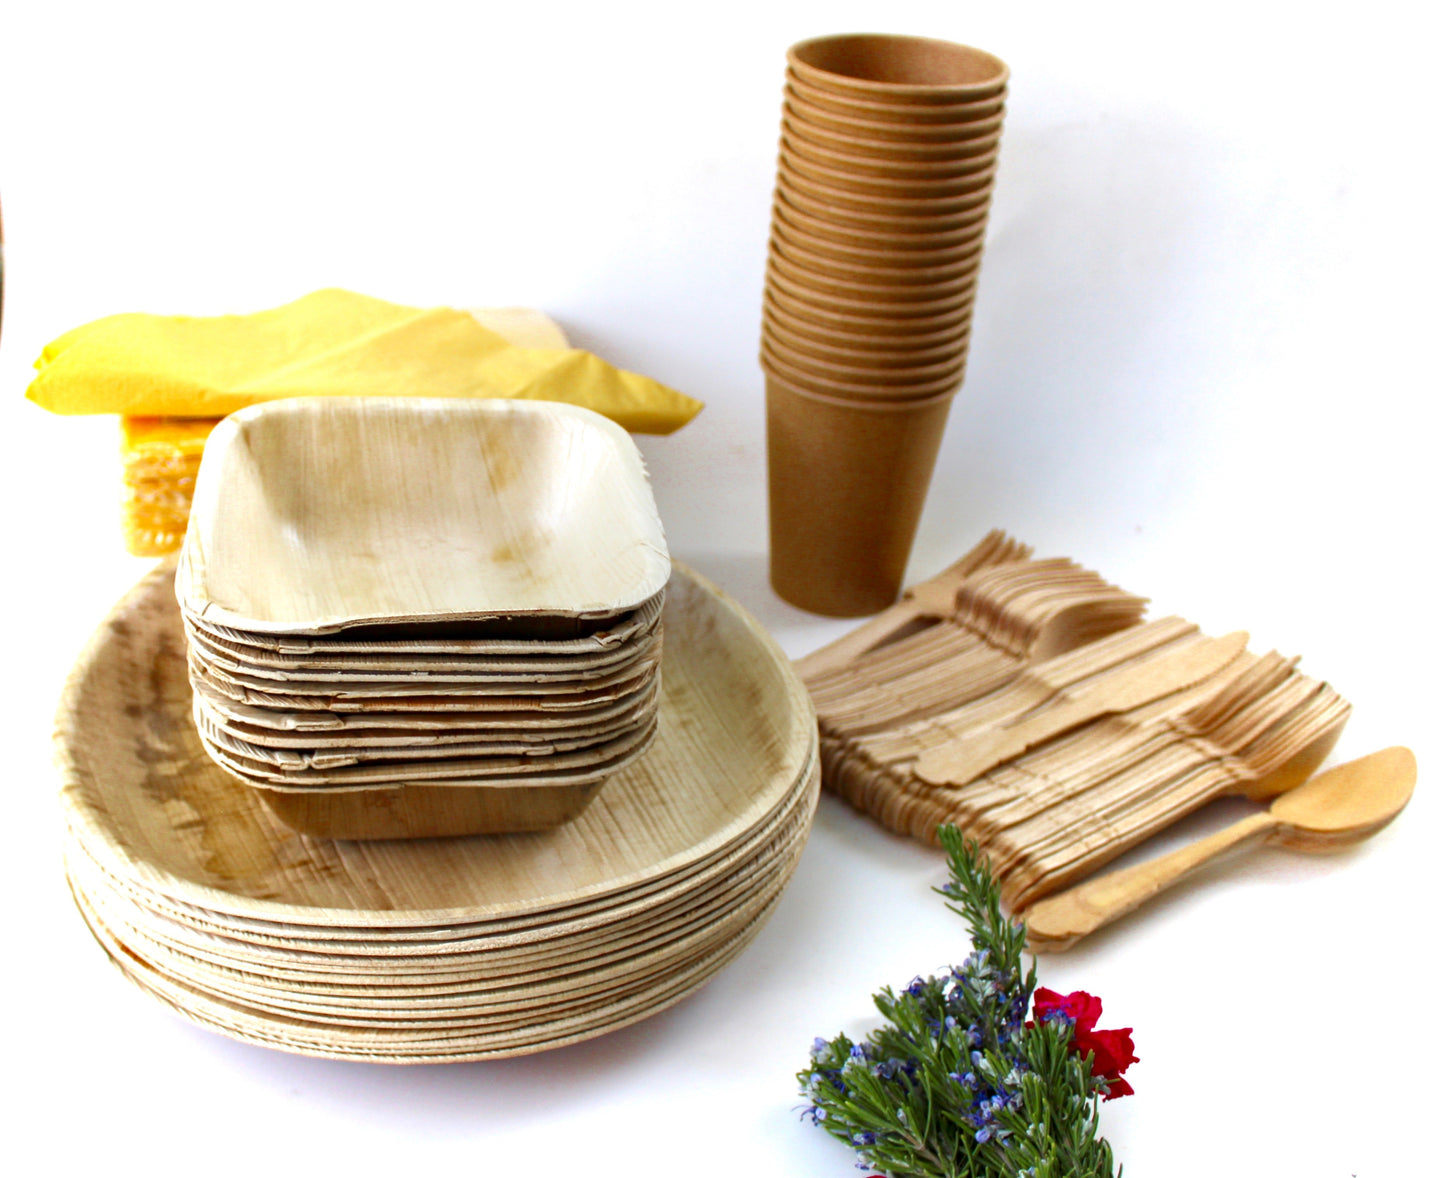 Bamboo Type Palm Leaf 25 Pic 10" Round  - 25 pice  5" Bowl "- 25  pic  cup  - 75 pic Cutlery - 50 Pic Napkin